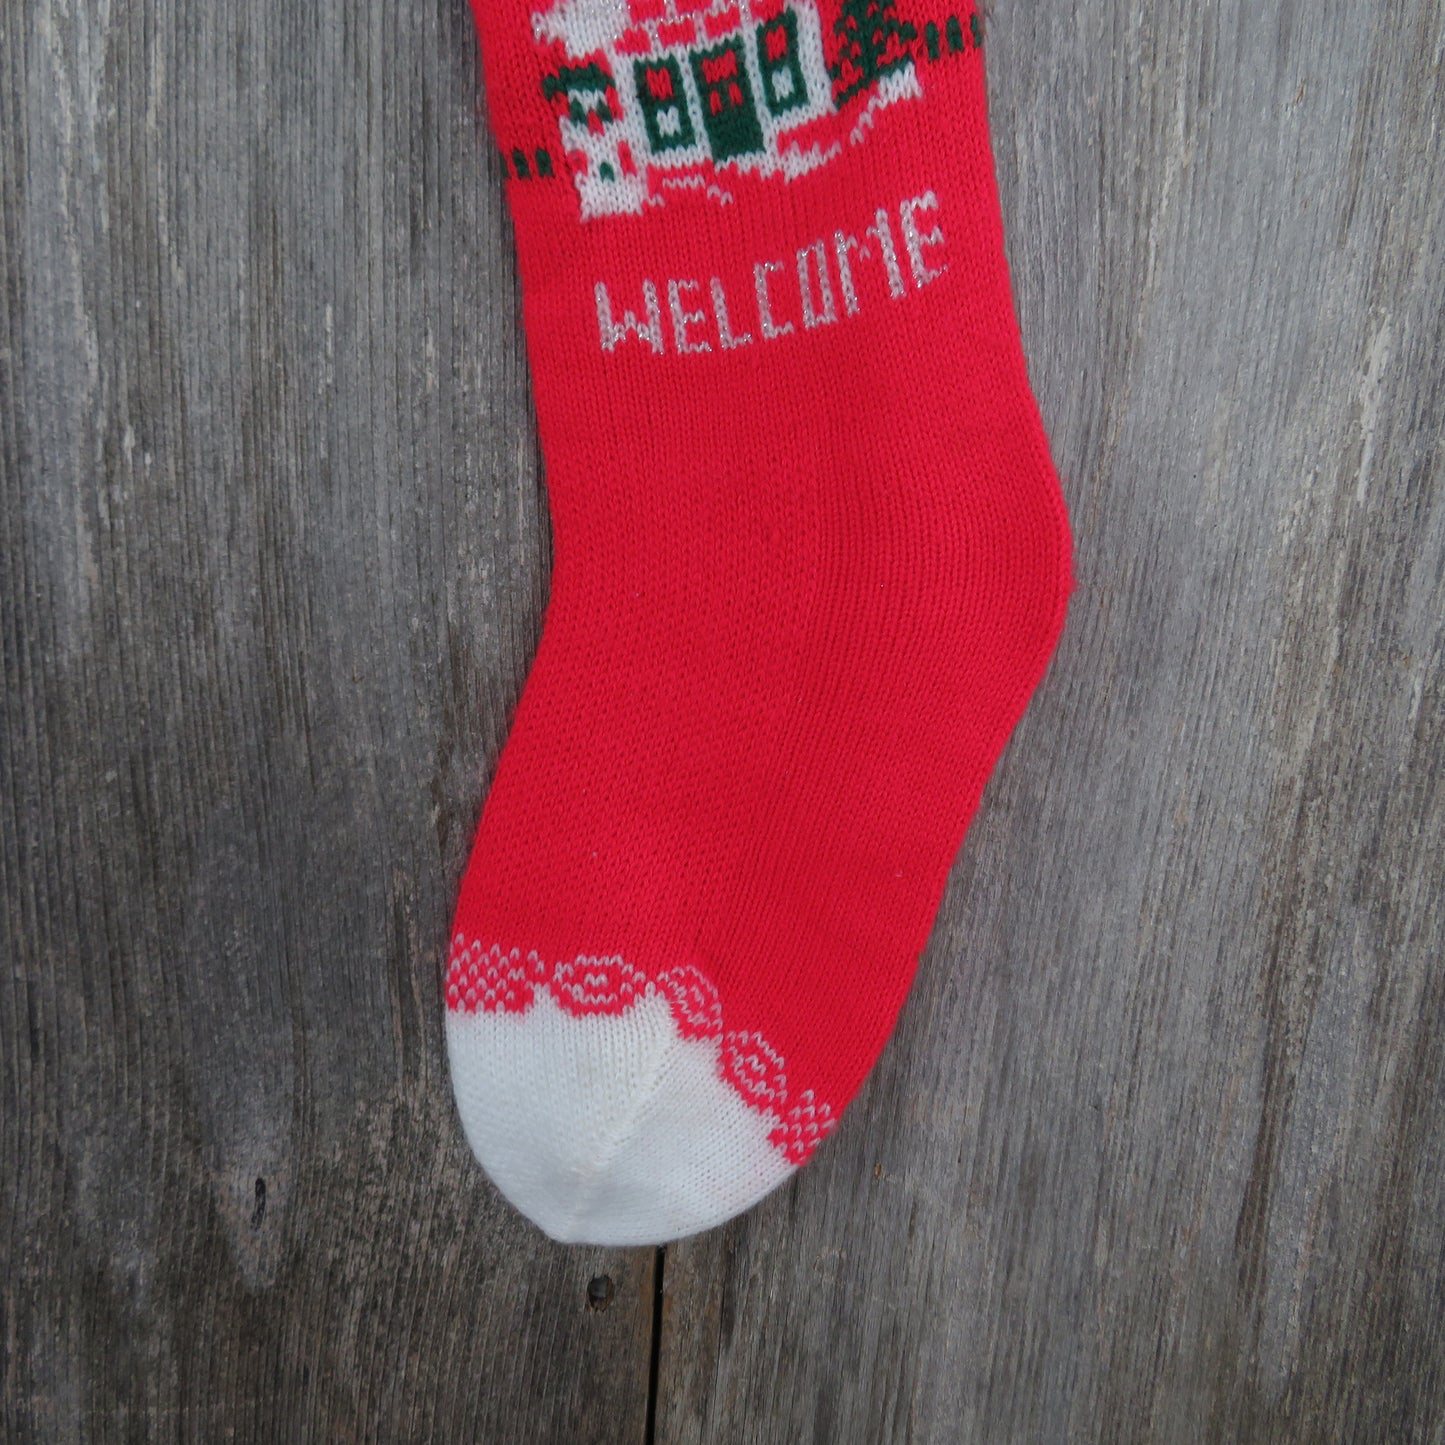 Vintage Welcome Home Stocking Knit Christmas Knitted House Red White 1980s - At Grandma's Table